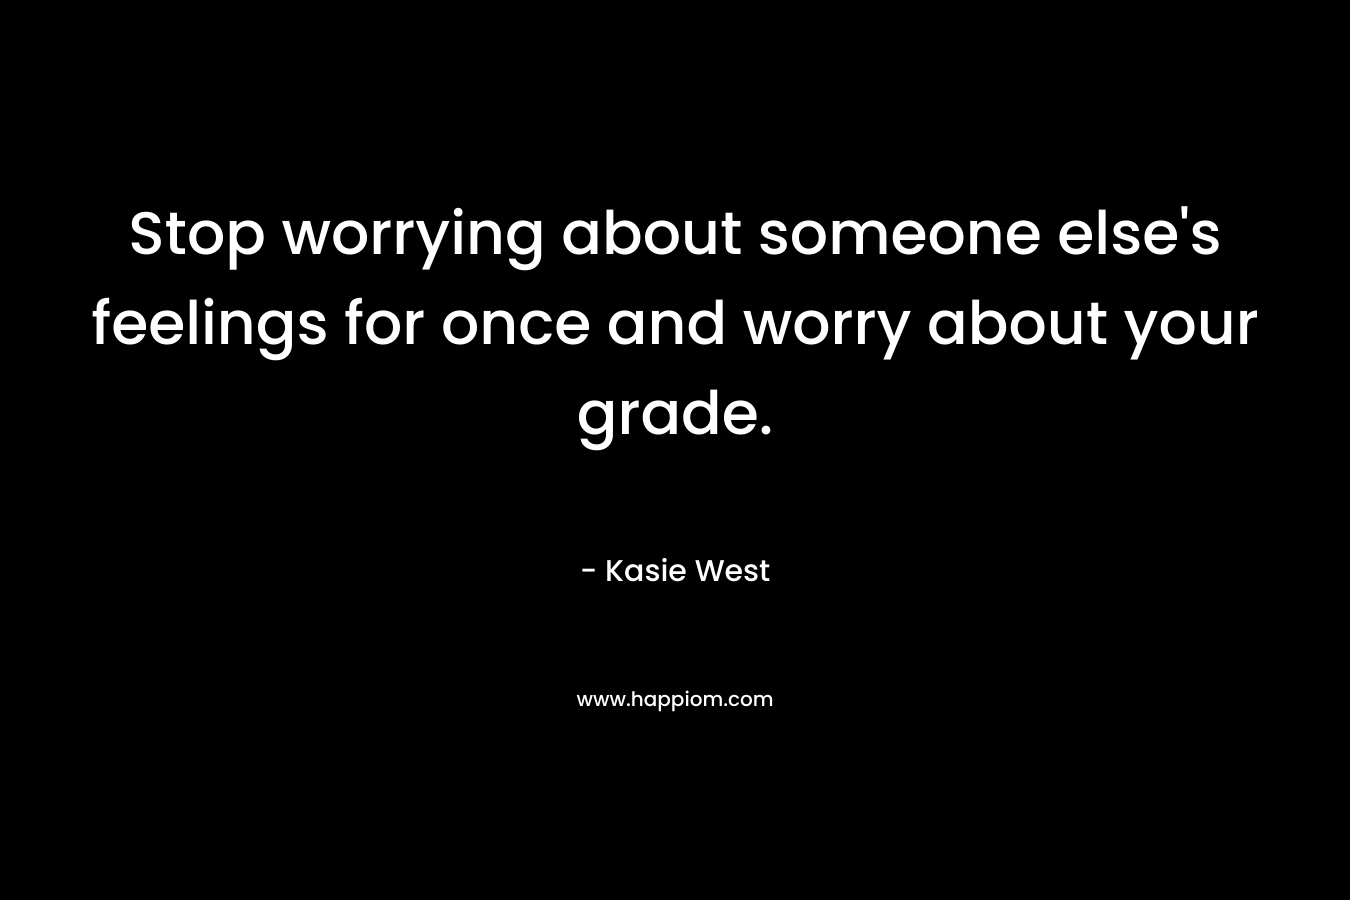 Stop worrying about someone else’s feelings for once and worry about your grade. – Kasie West